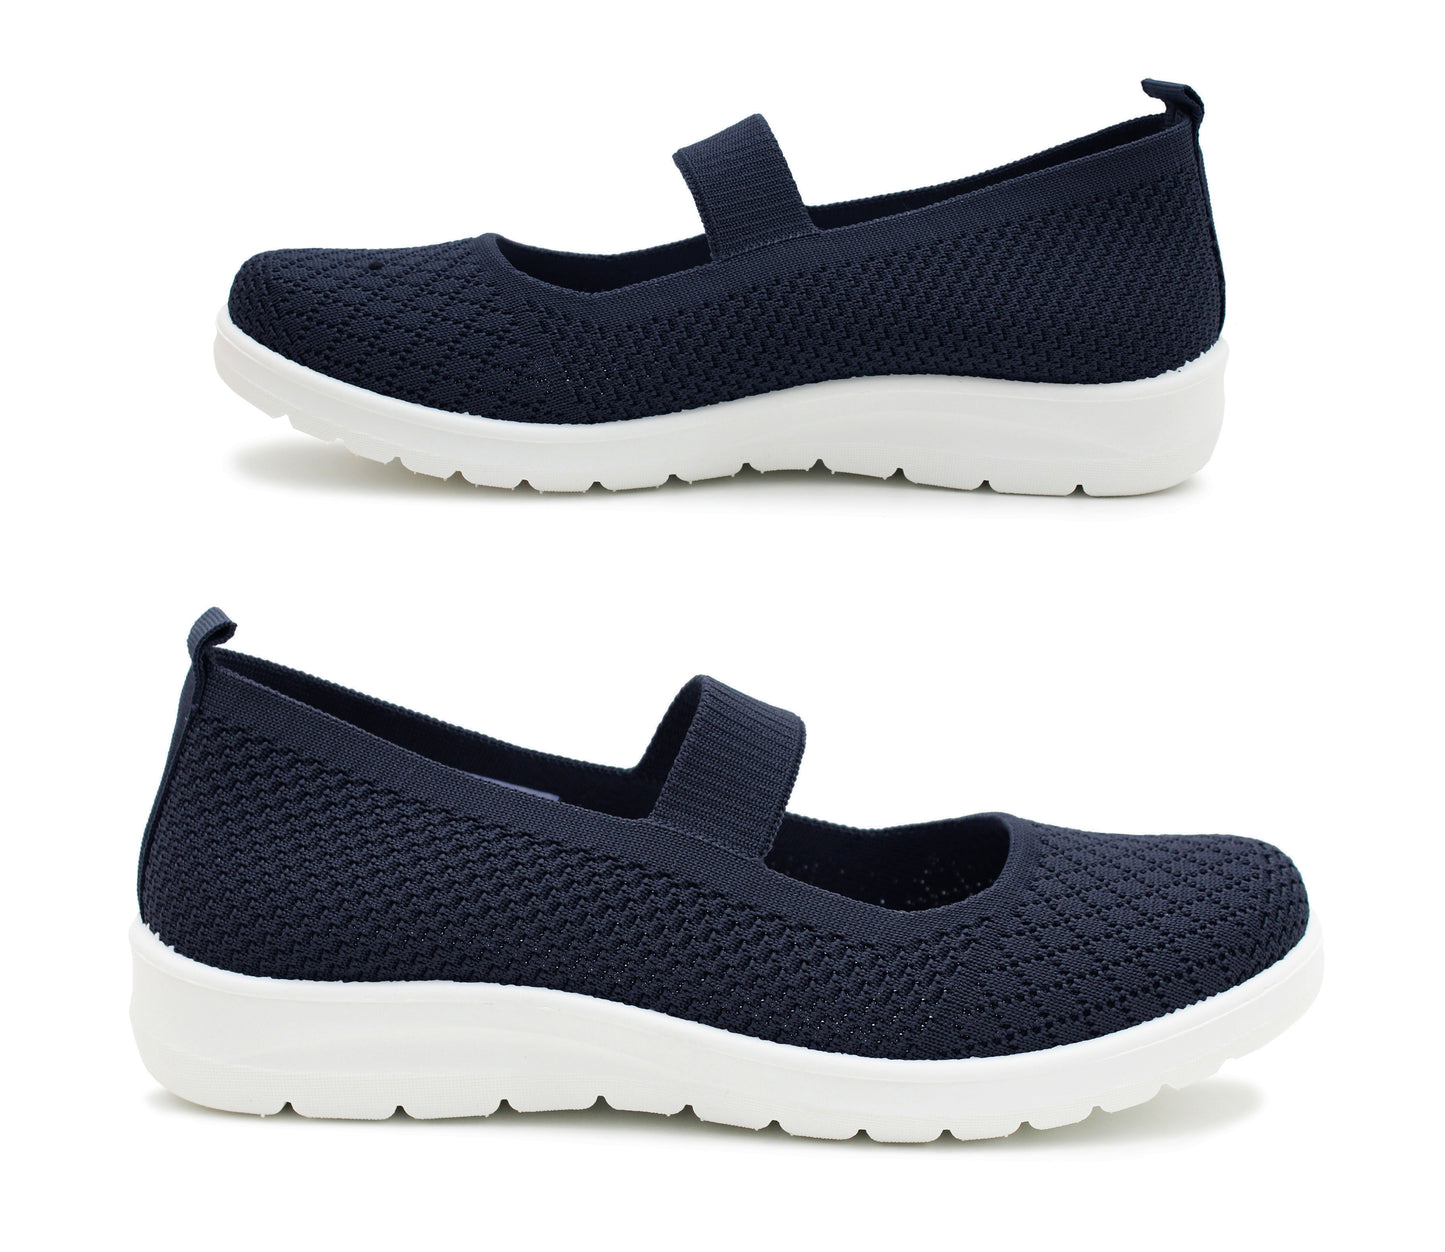 BERNIE Womens Slip On Elastic Strap Breathable Mesh Lightweight Casual Flat Walking Active Sneaker Pumps Fashion Trainers in Navy